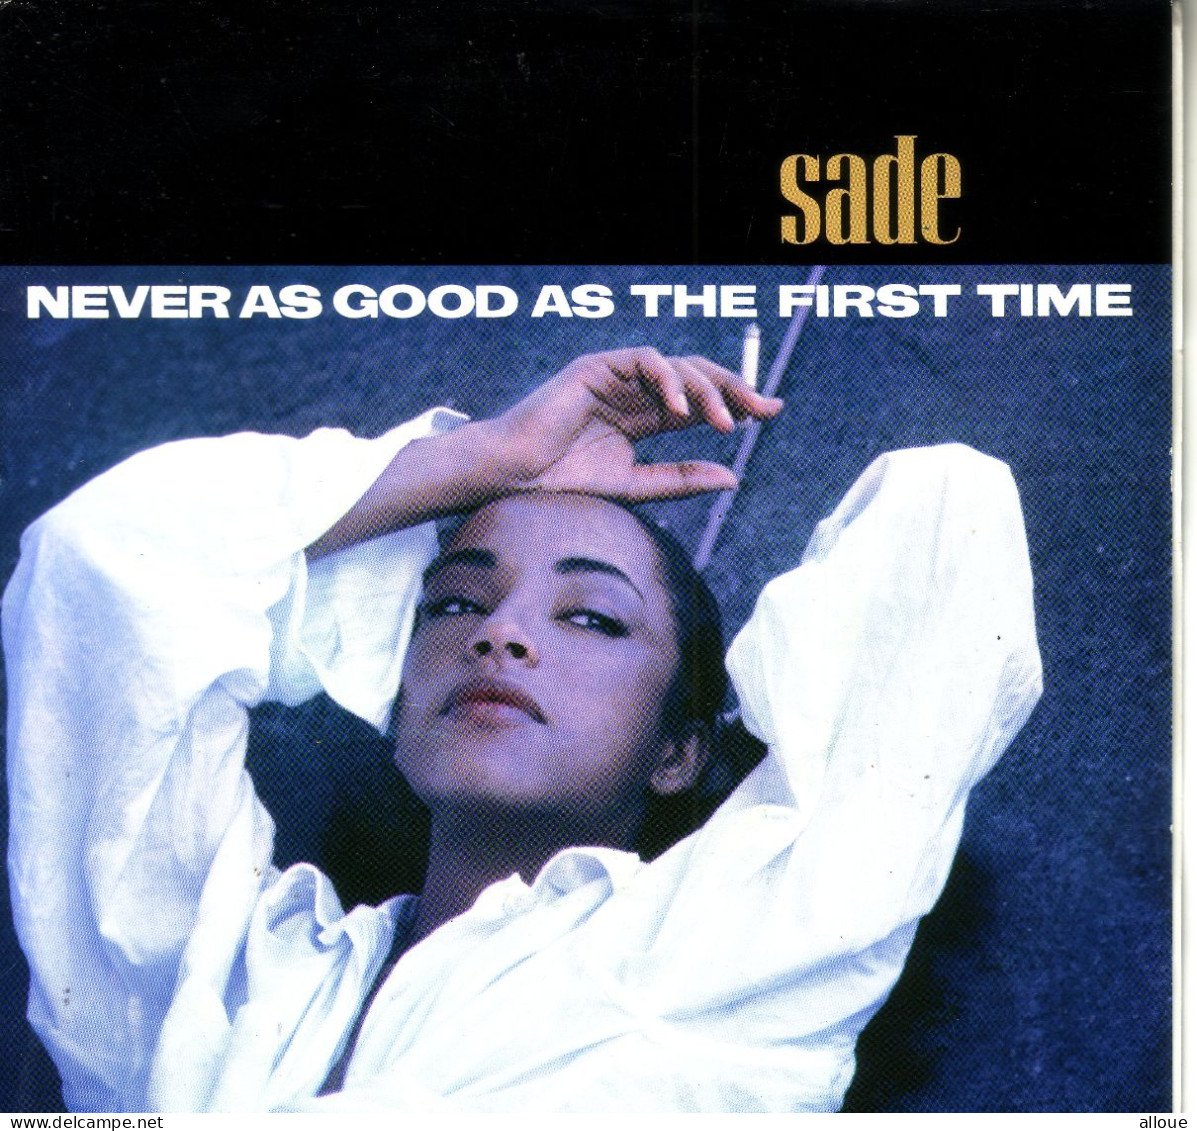 SADE - HL SG - NEVER AS GOOD AS THE FIRST TIME + 1 - Soul - R&B